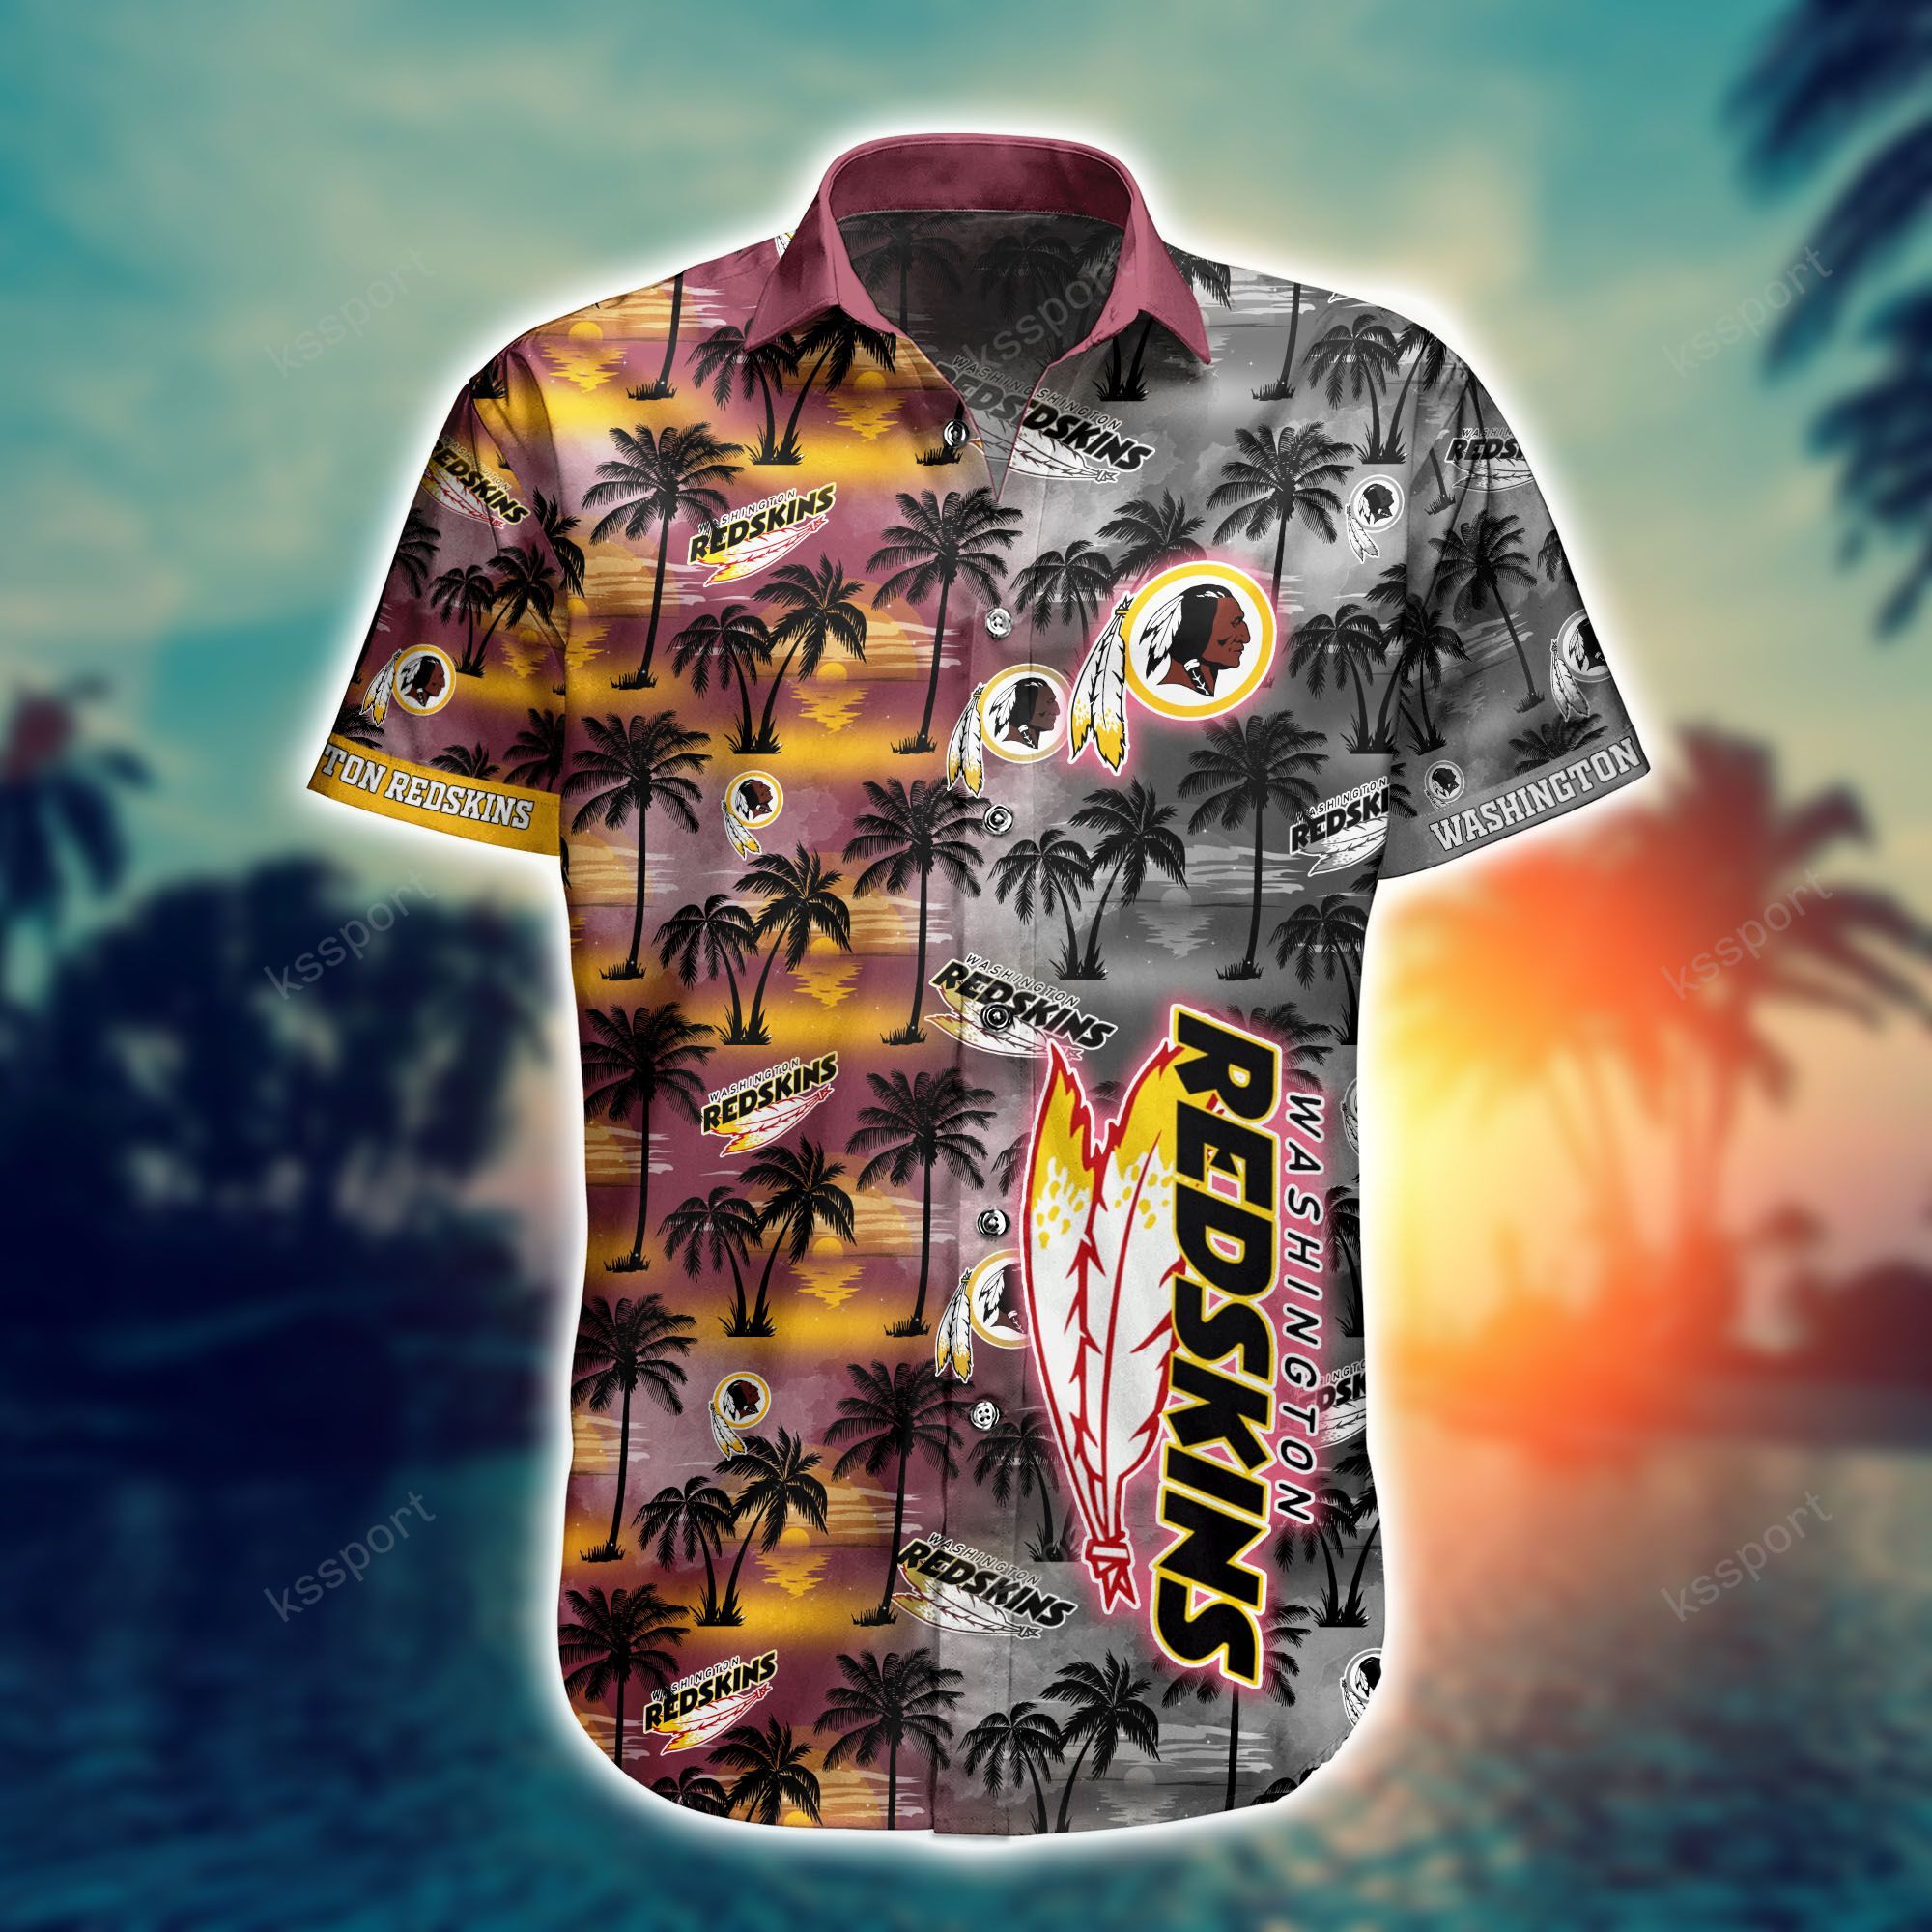 Top cool Hawaiian shirt 2022 - Make sure you get yours today before they run out! 217